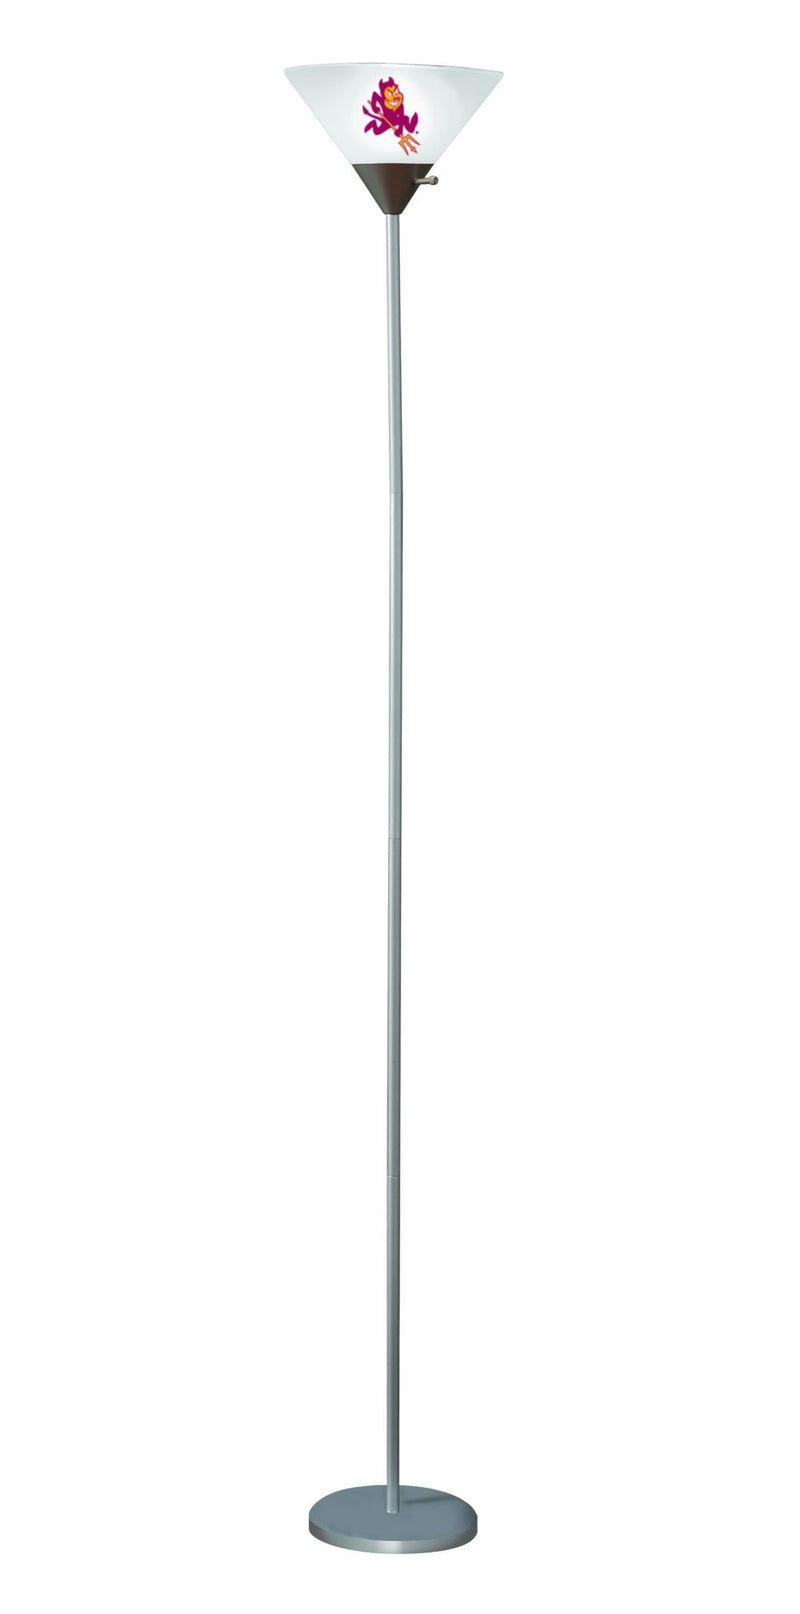 Torchiere Floor Lamp - Arizona State University
Arizona State Sun Devils, AZS, COL, OldProduct
The Memory Company